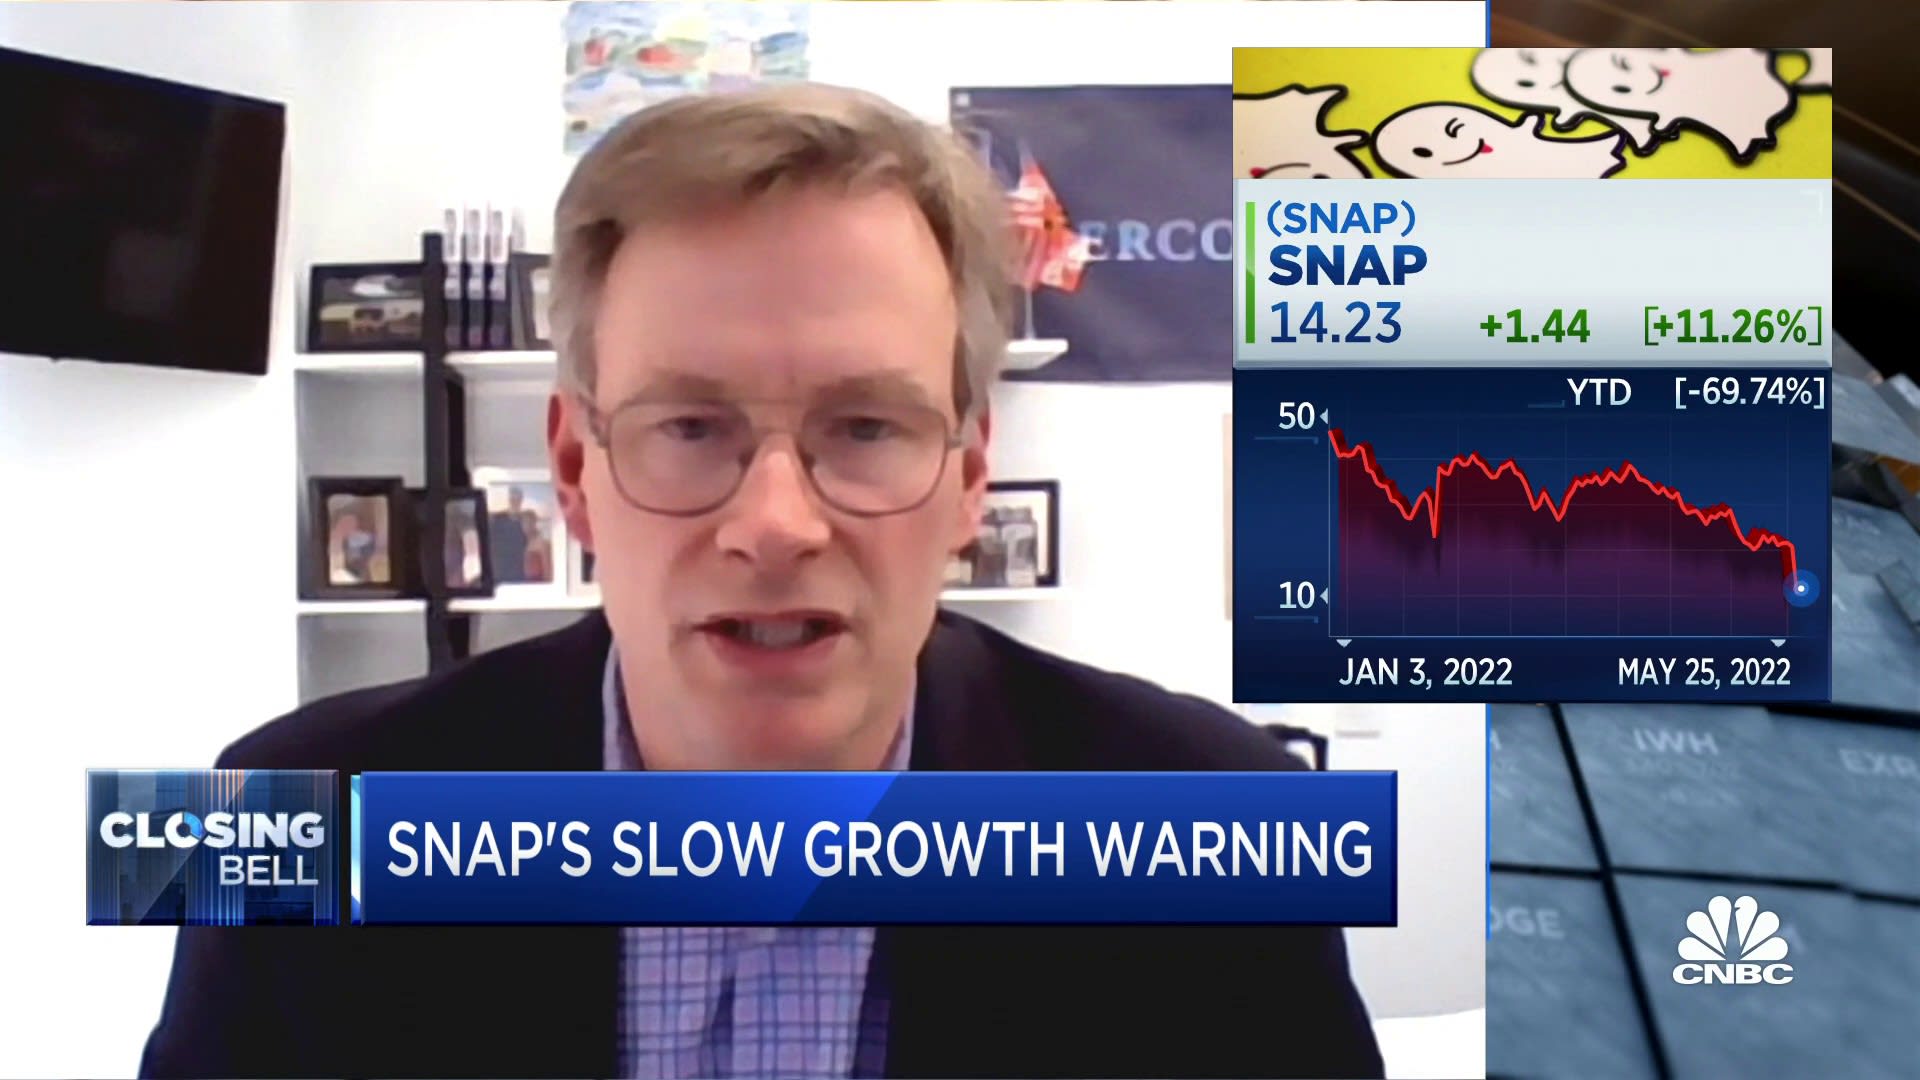 Snap has substantial exposure to brand advertising that'll hurt more than performance marketing, says Evercore's Mahaney